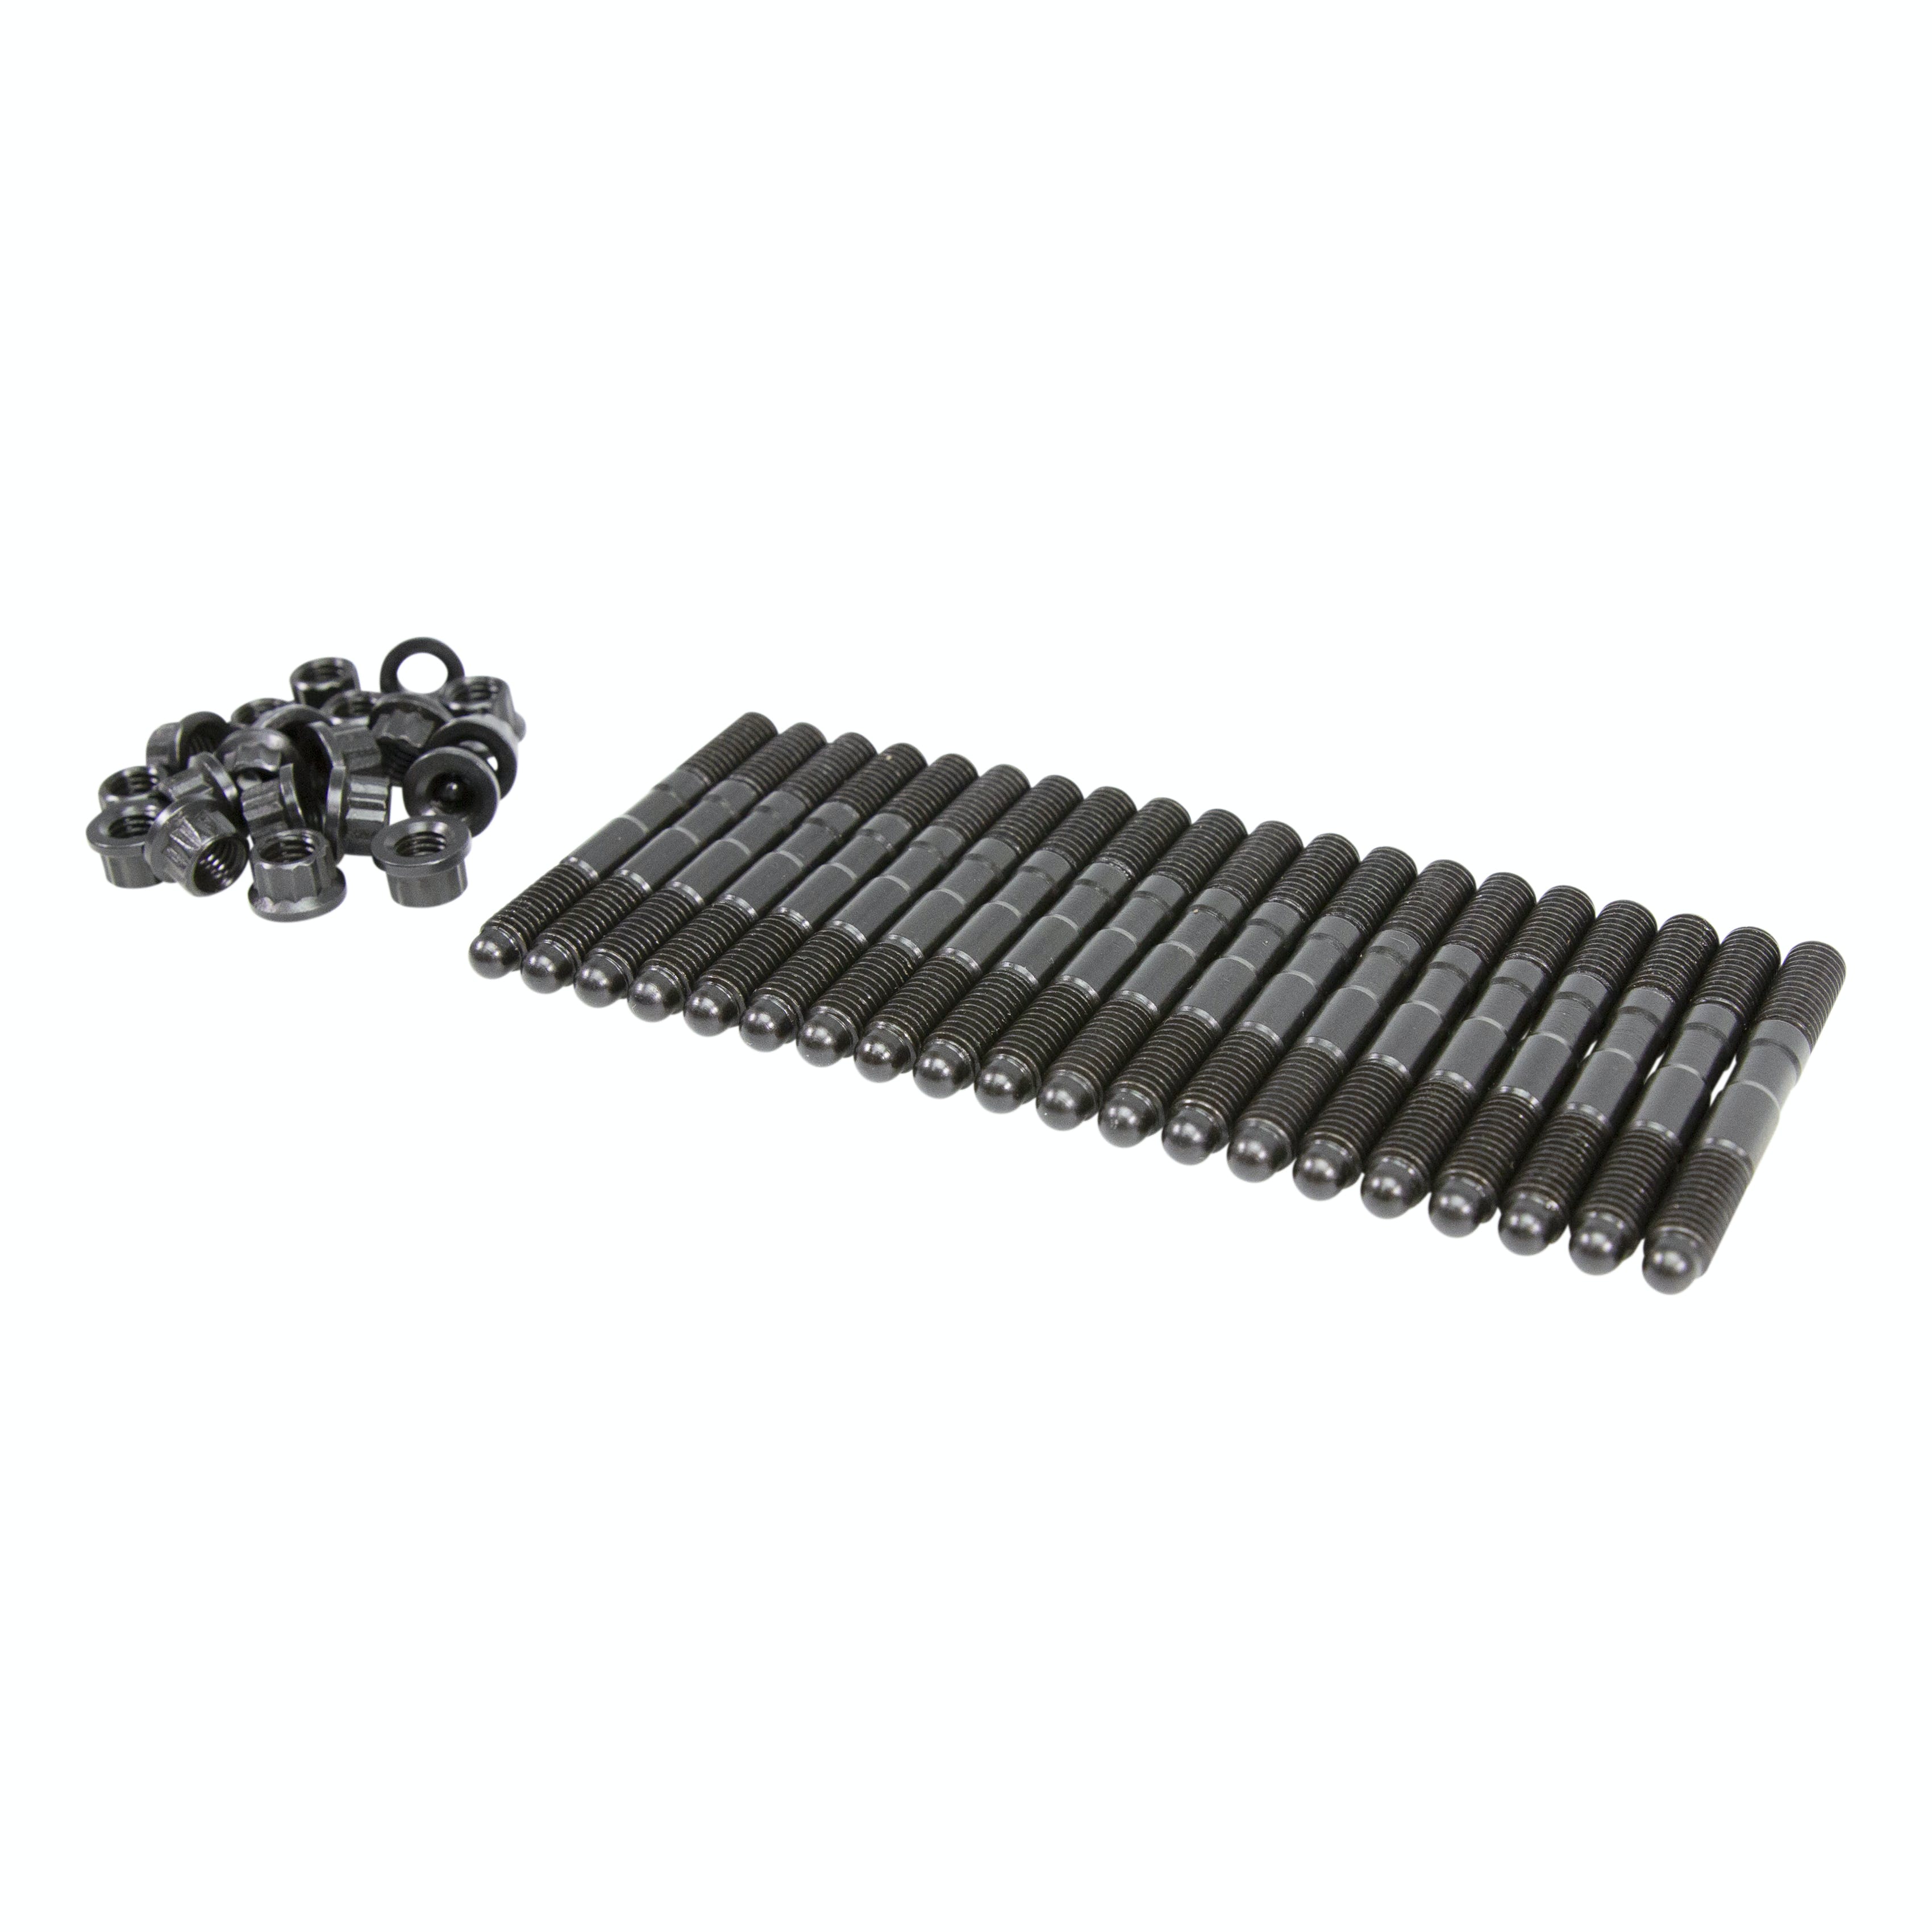 Competition Cams 4589-KIT M8x1.25 threads on both sides. 67mm Overall Thread Length. 12 Point flange nuts